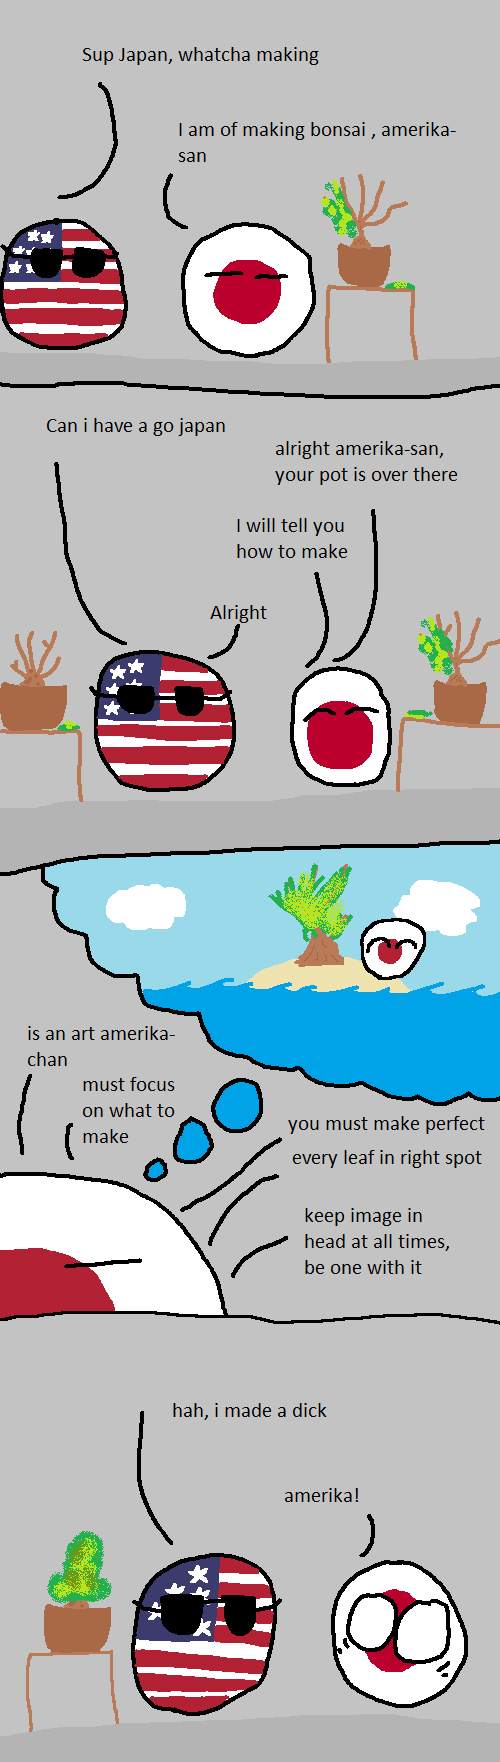 Whats on Americas Mind